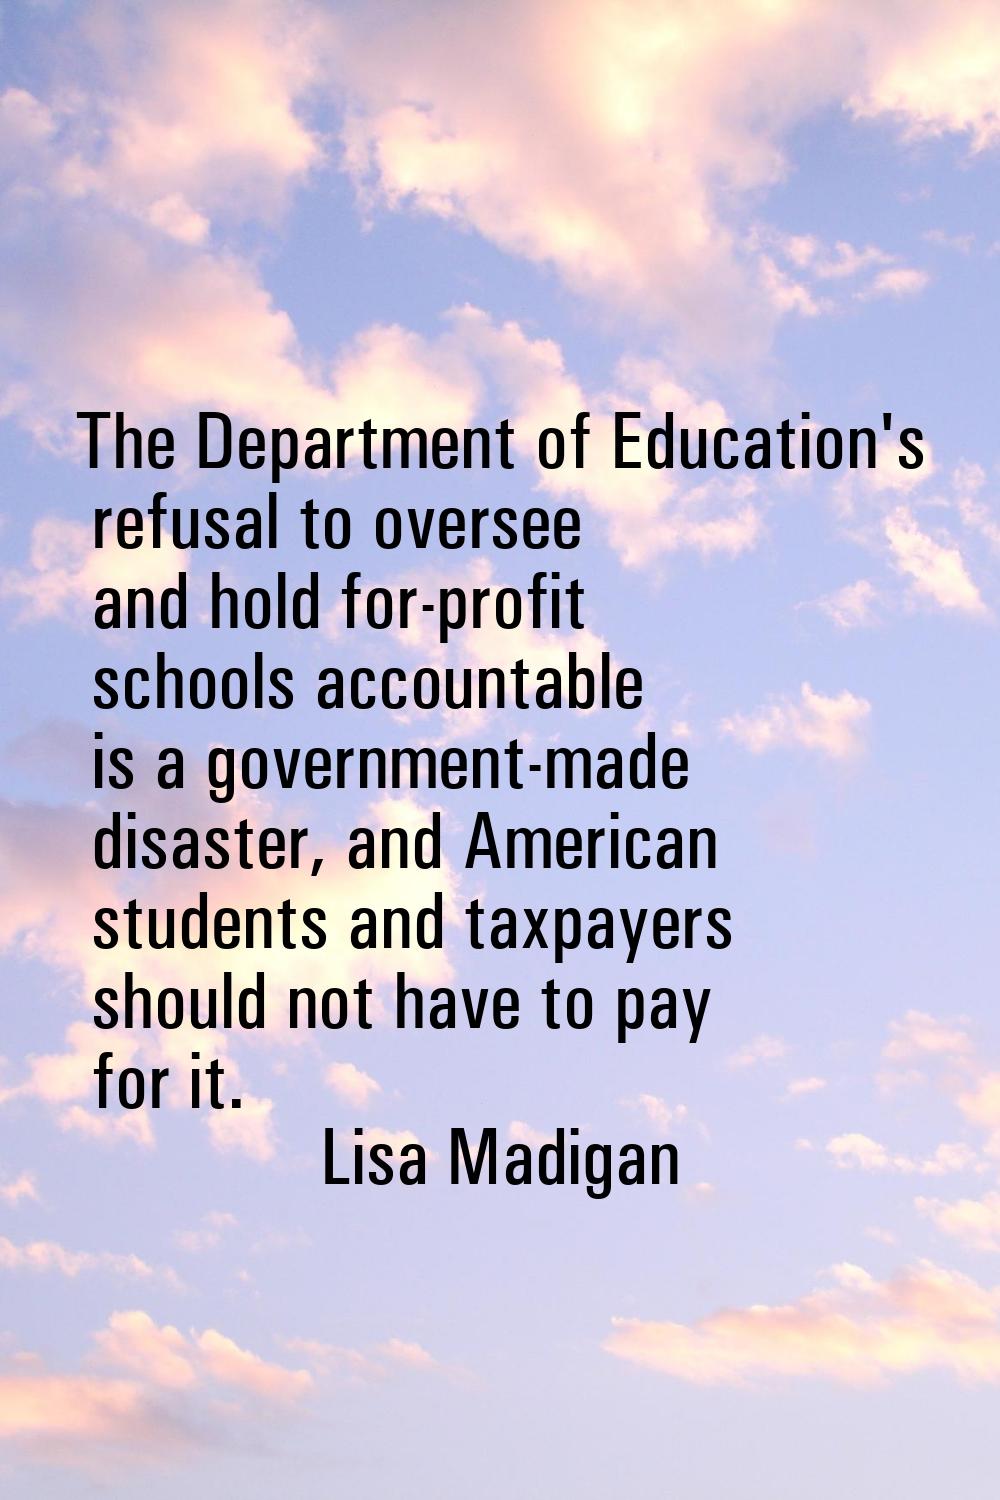 The Department of Education's refusal to oversee and hold for-profit schools accountable is a gover